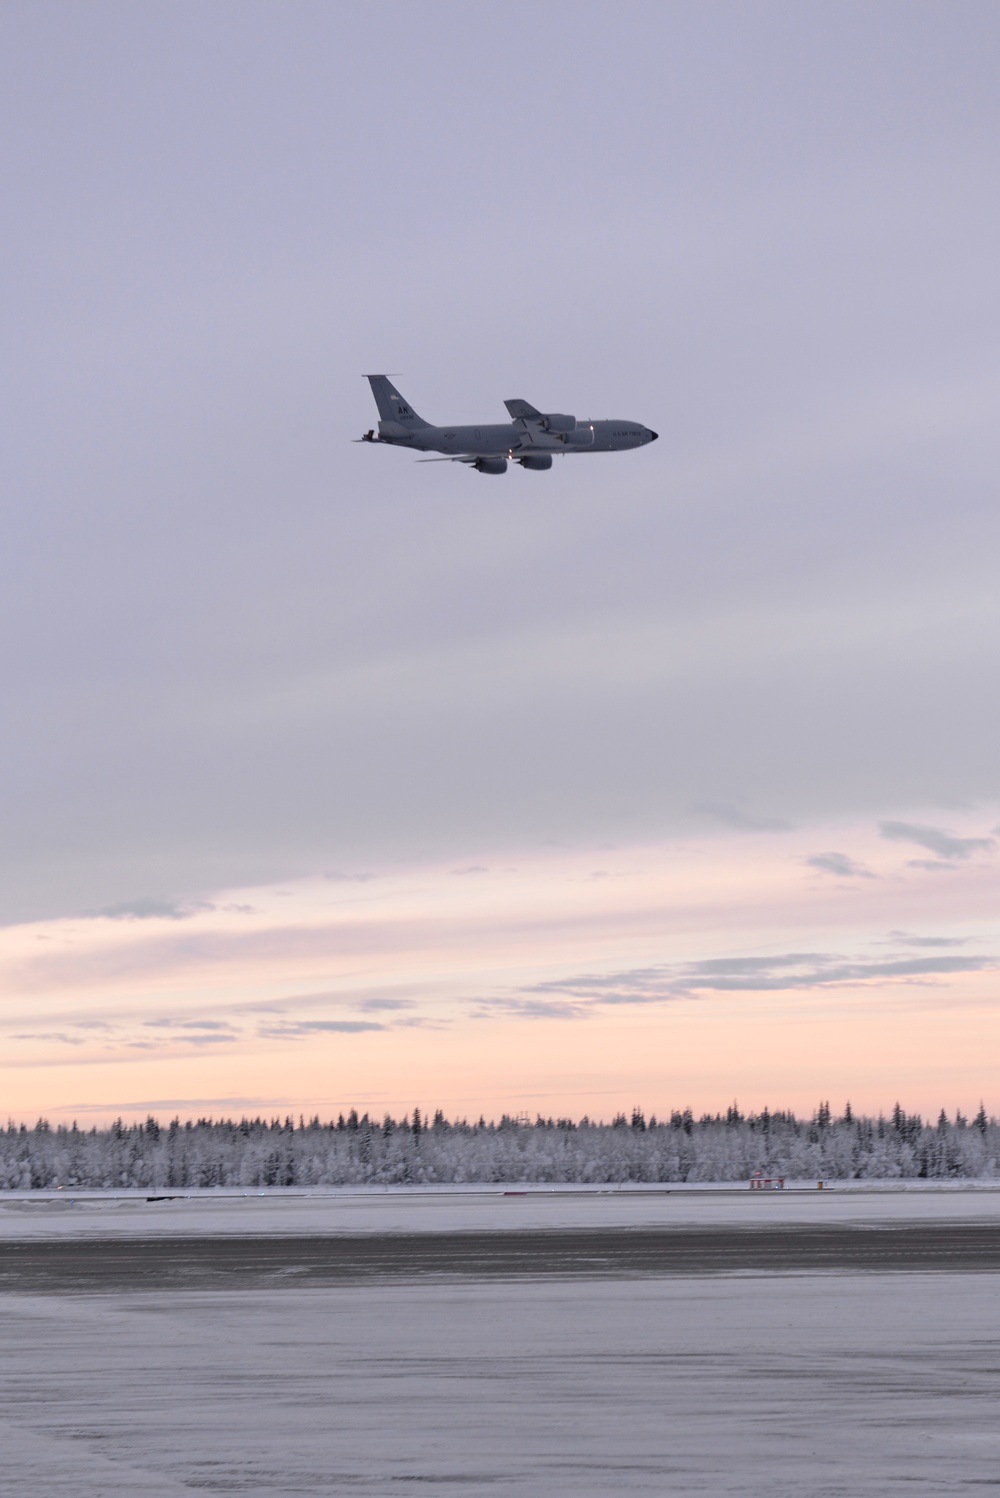 Winter flying at Eielson Air Force Base